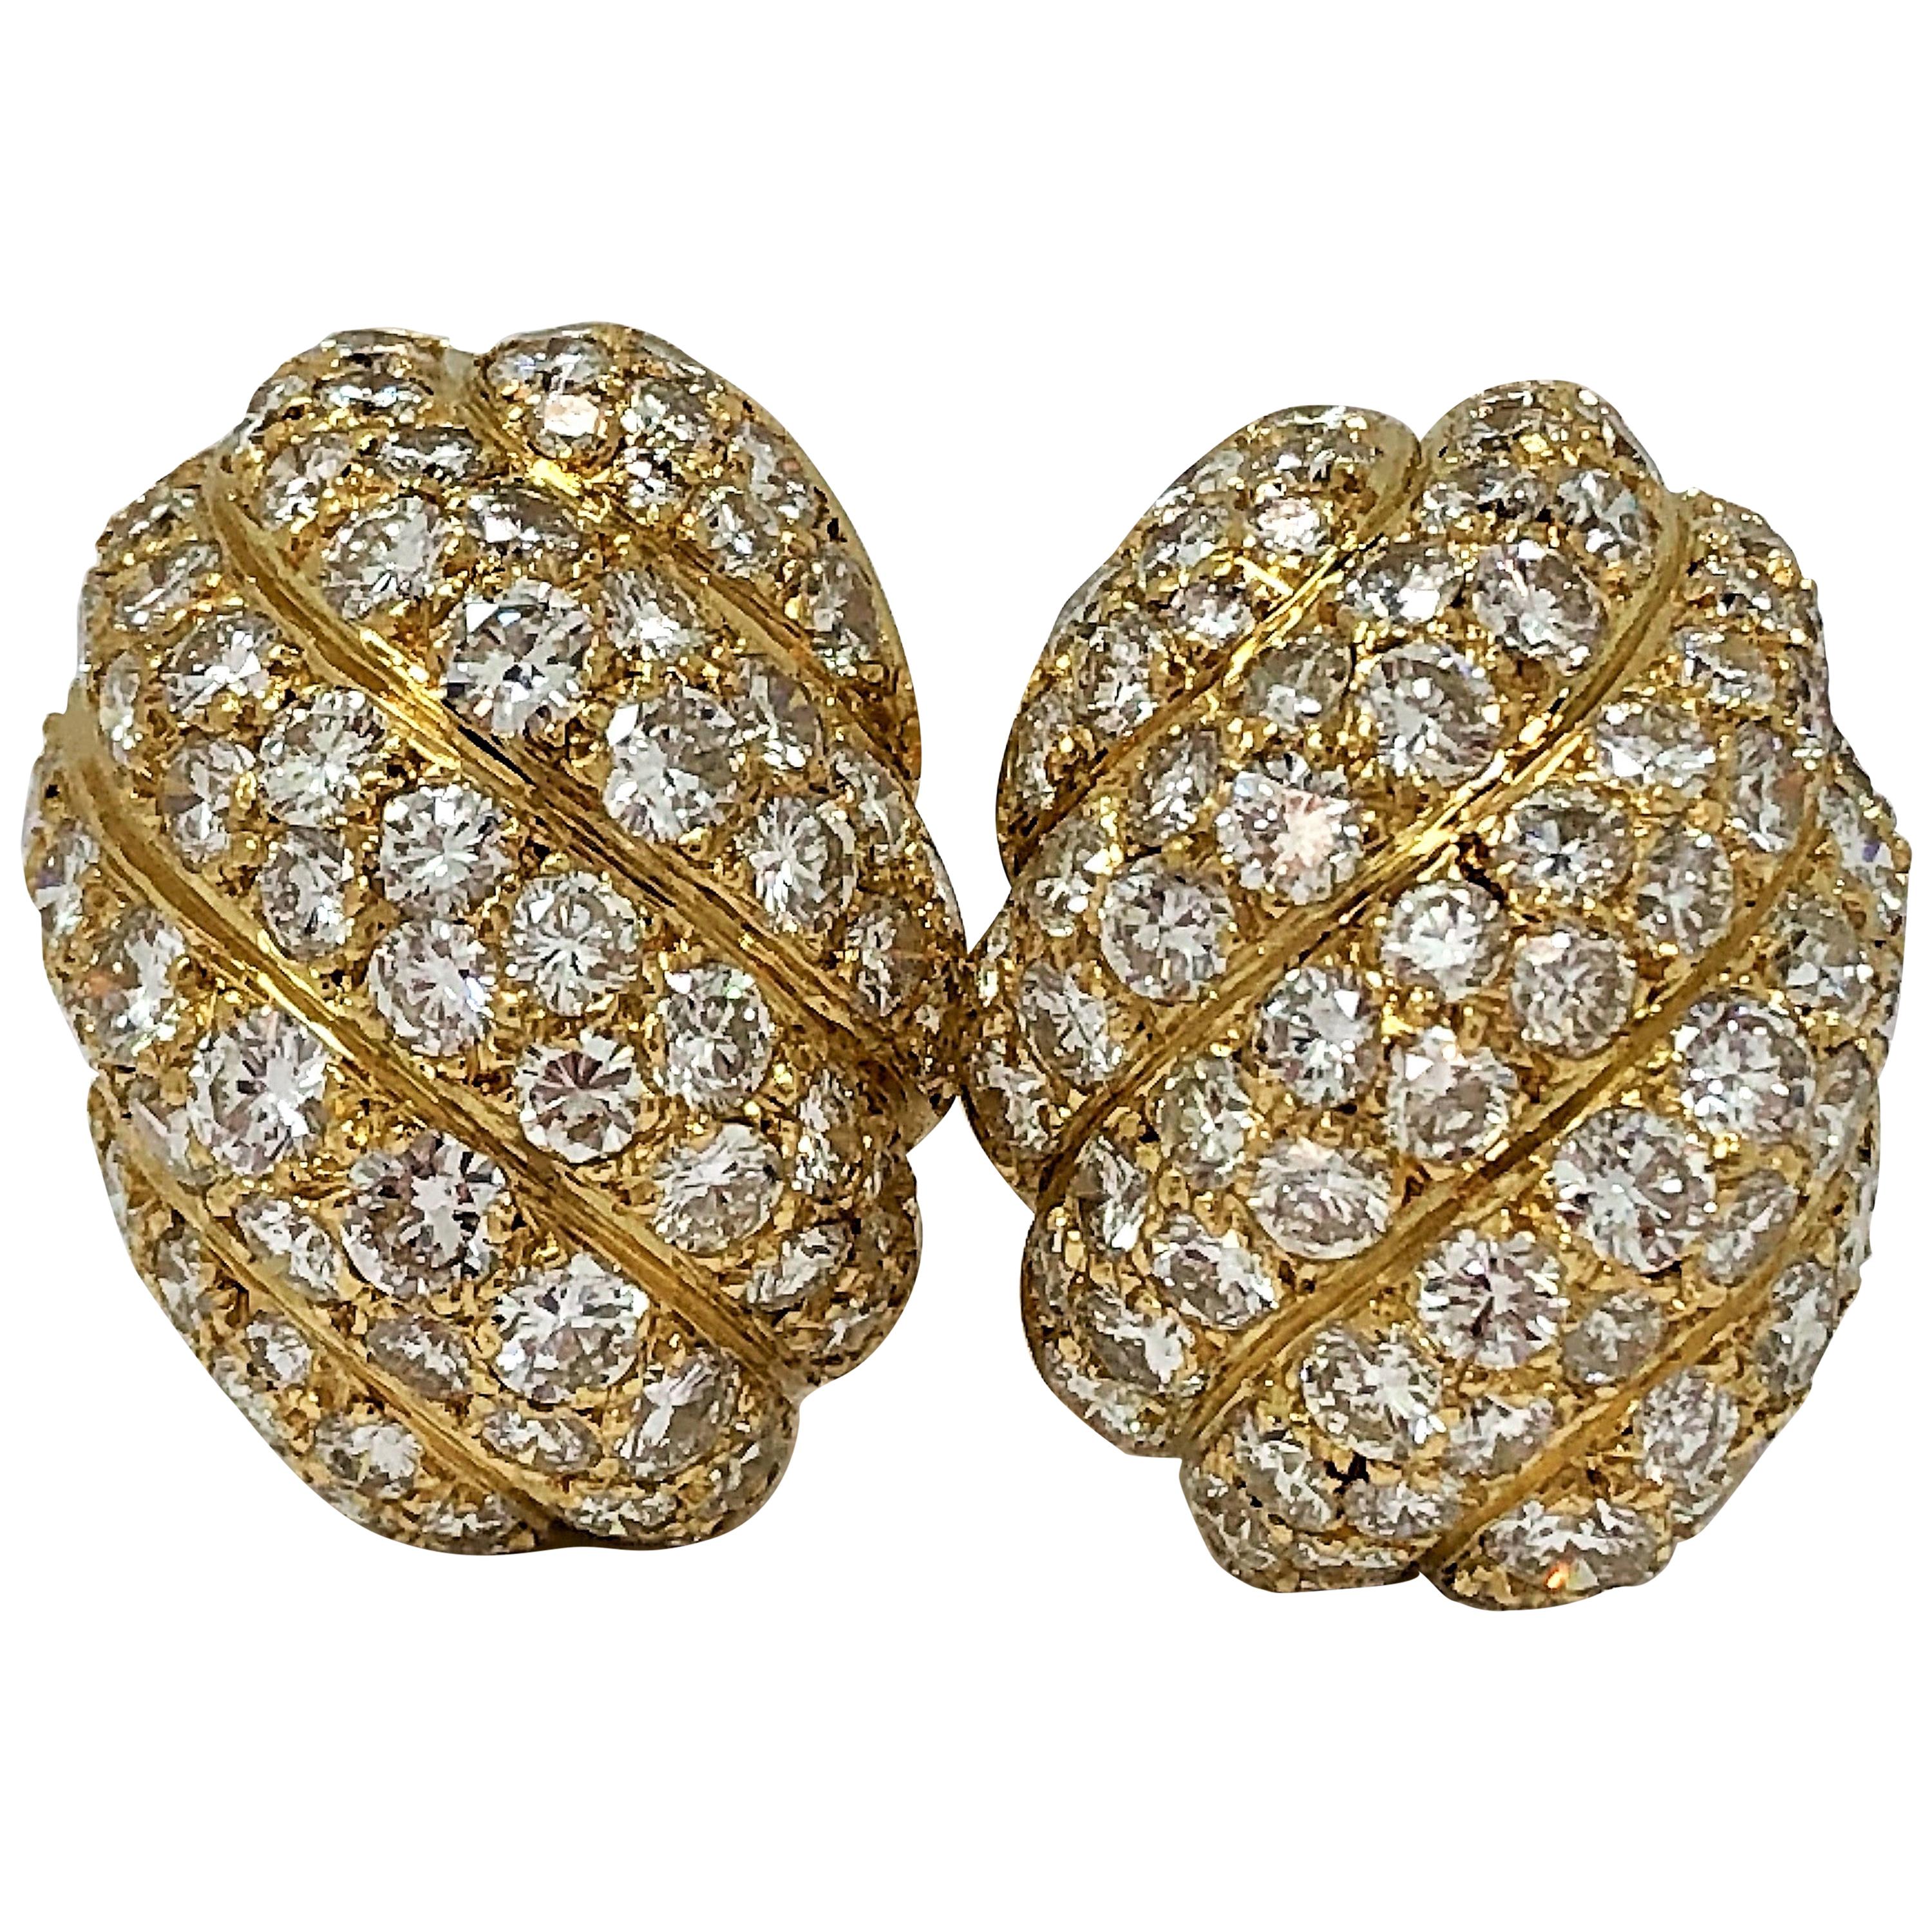 Mid Size French Gold and Diamond Clip on Dome Earrings in a Swirl Design